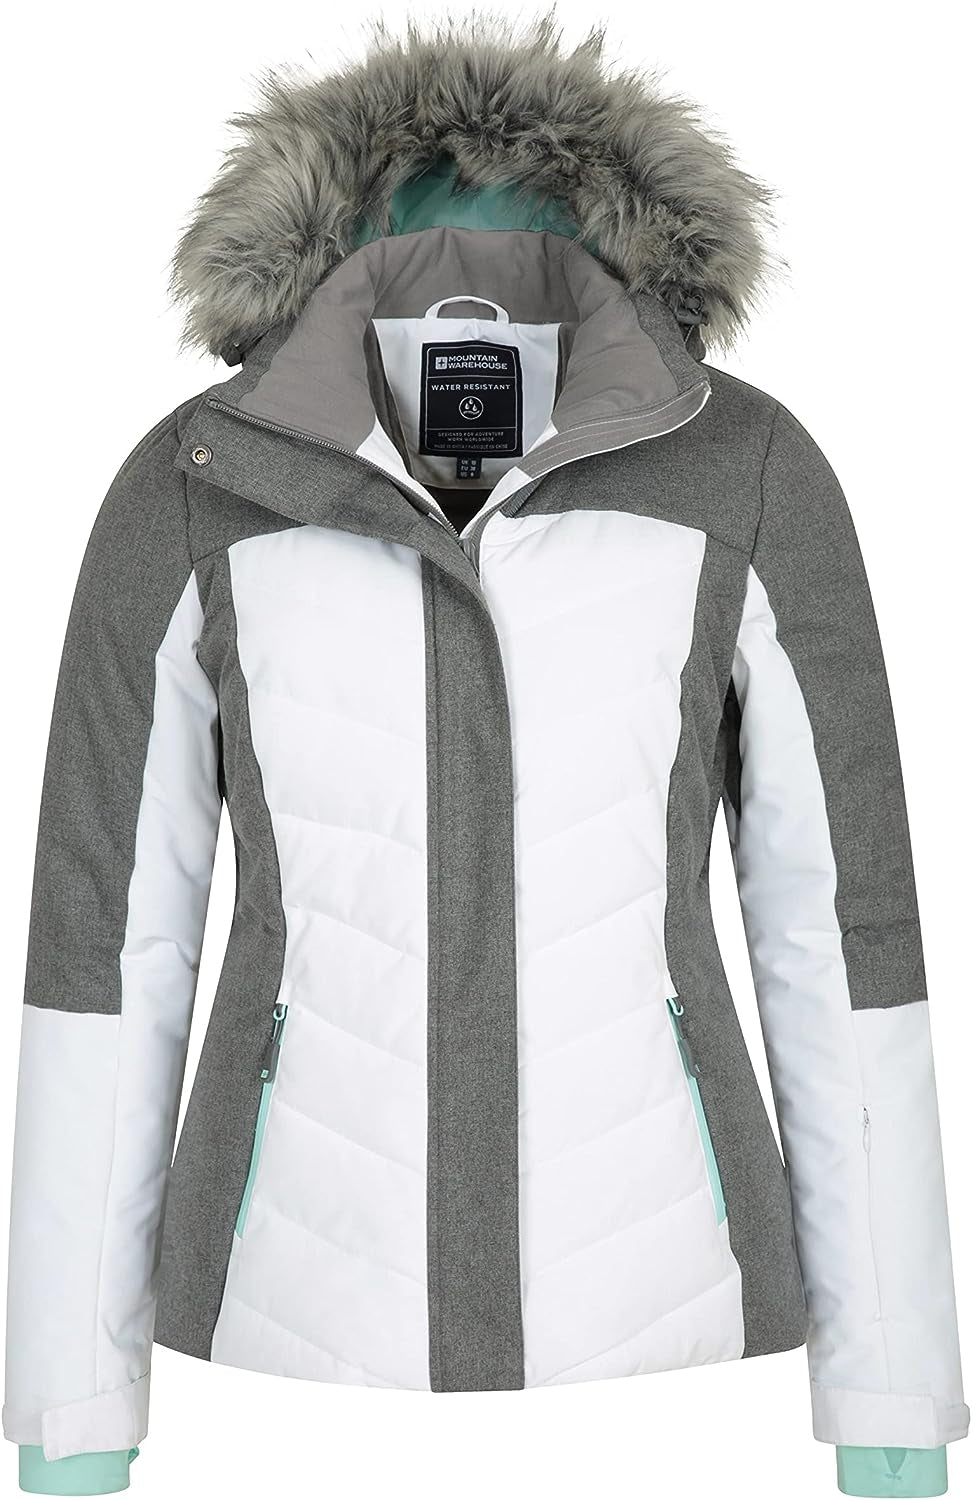 "Experience Optimal Warmth and Fashion on the Slopes with Powder Women's Padded Ski Jacket - Guaranteed Snowproof!"